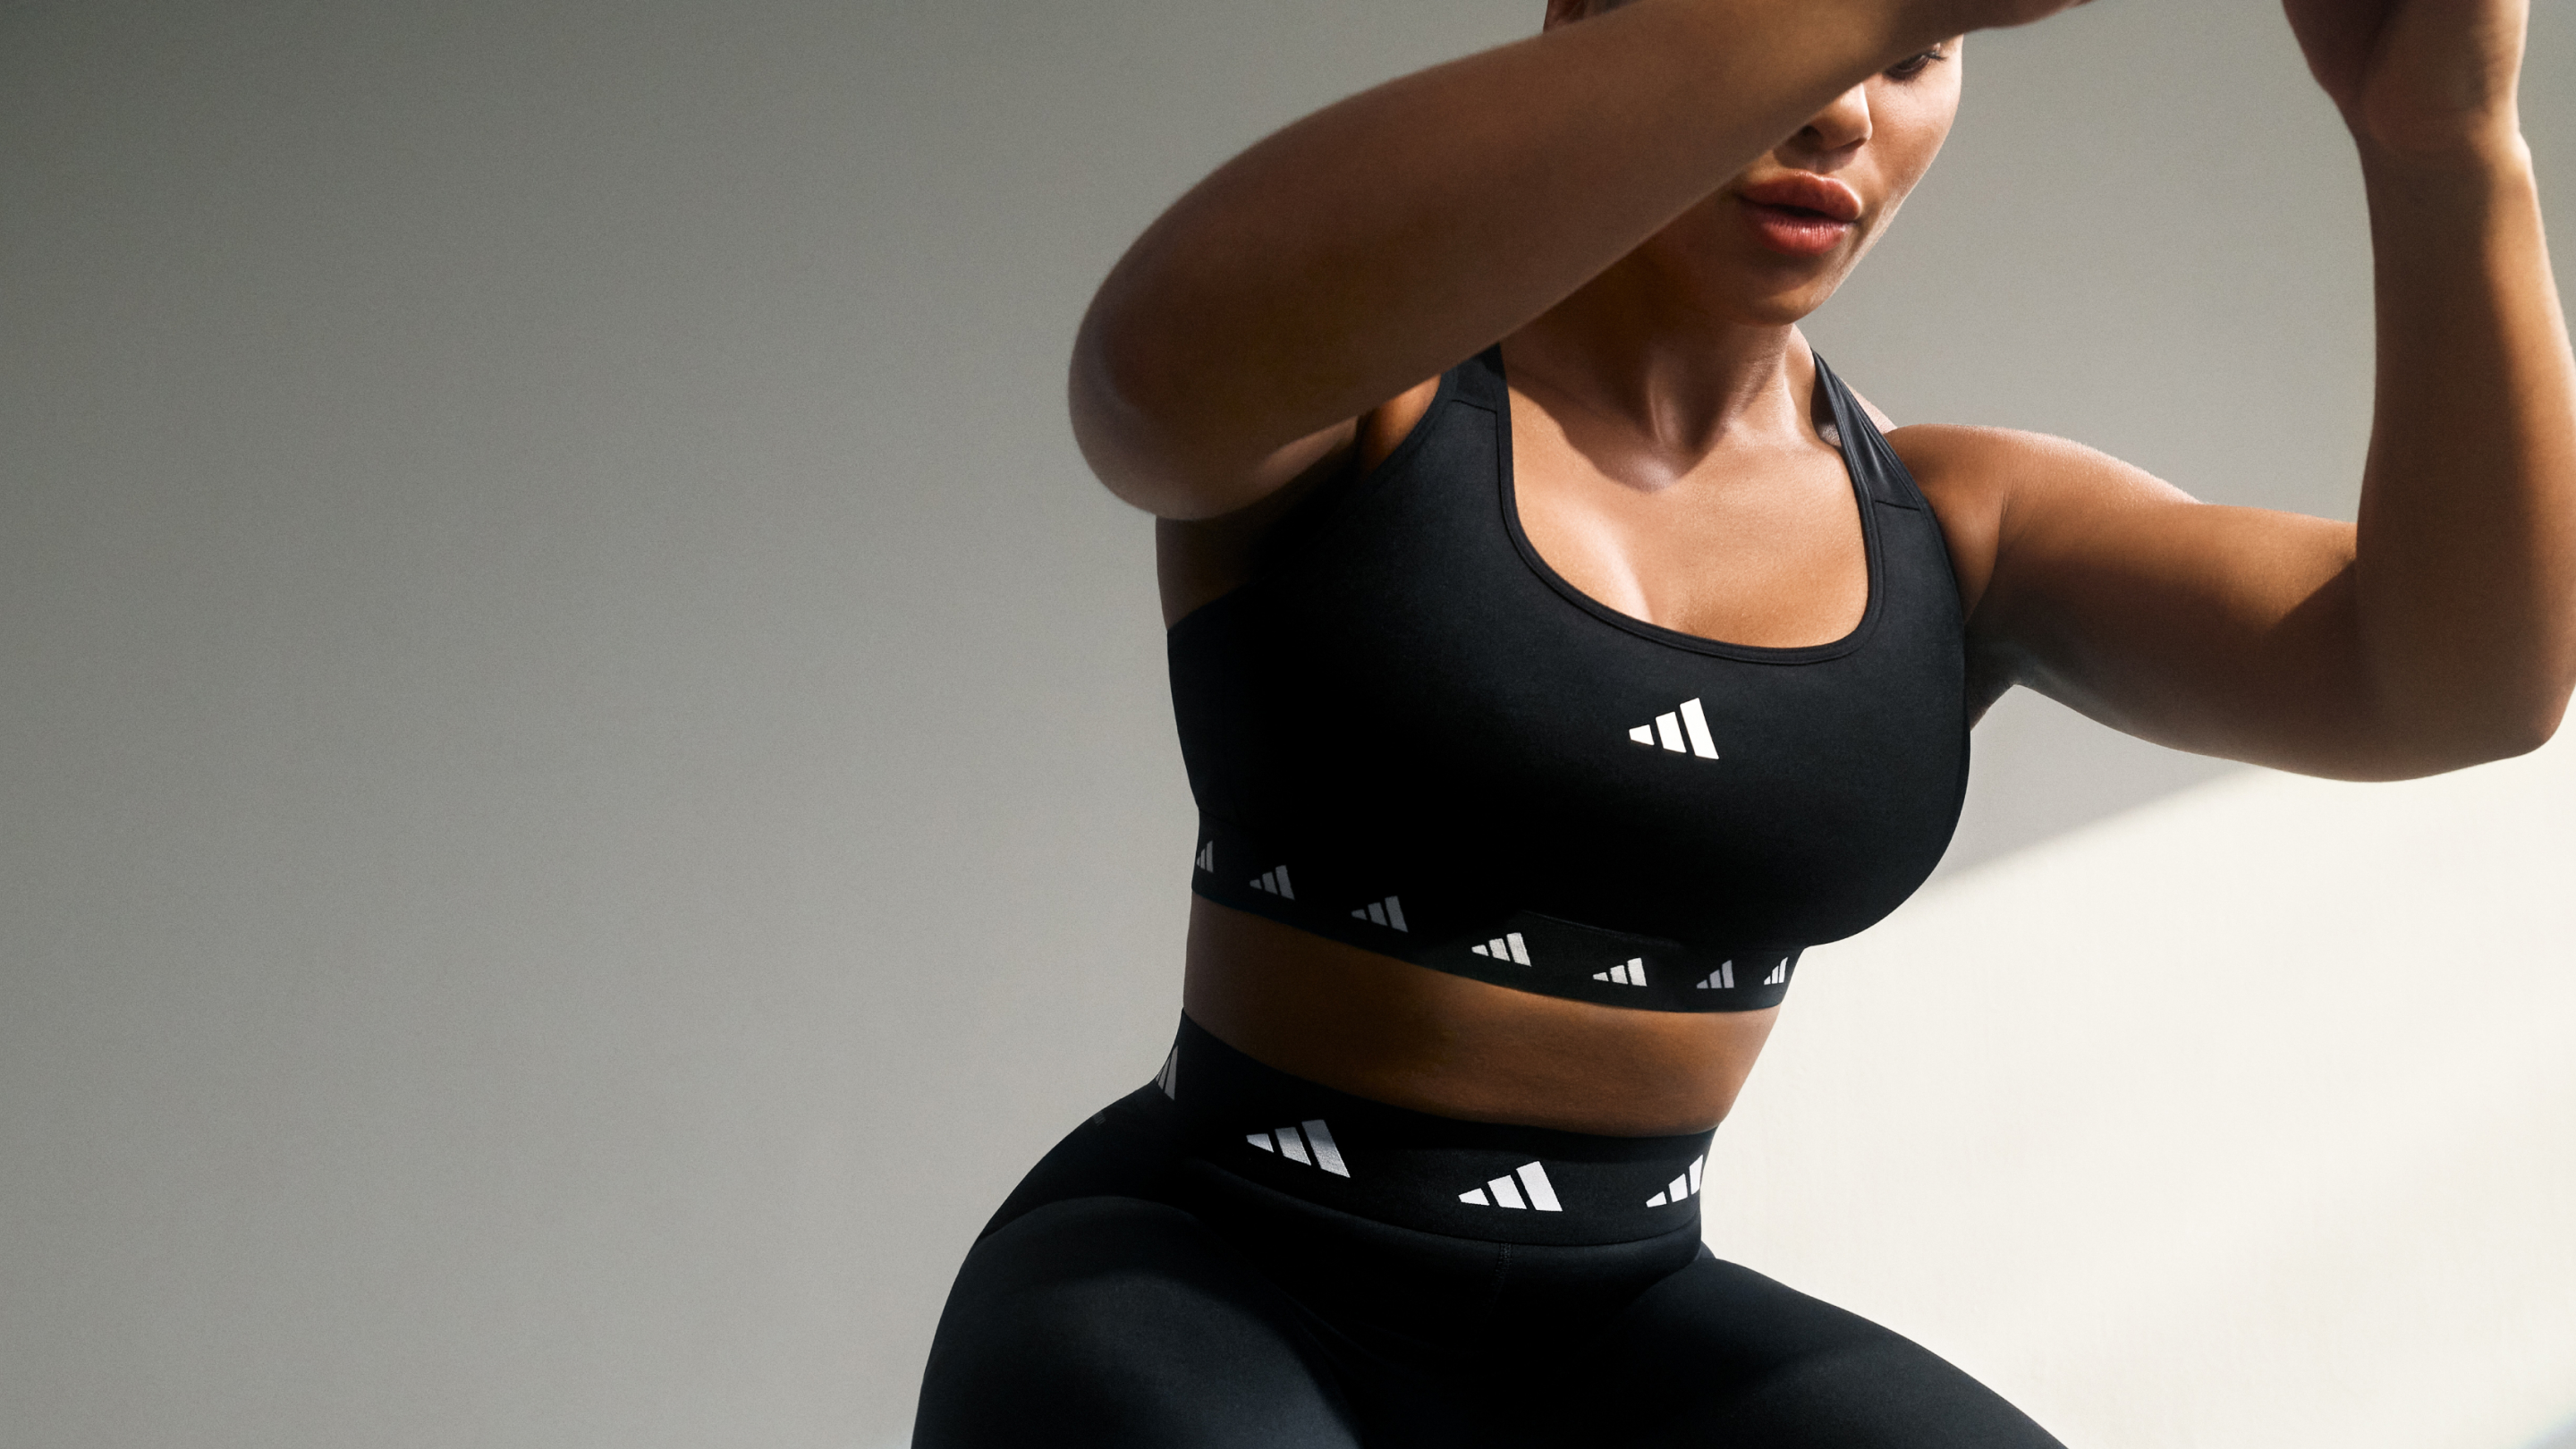 adidas Training Tech Fit high waisted leggings in black